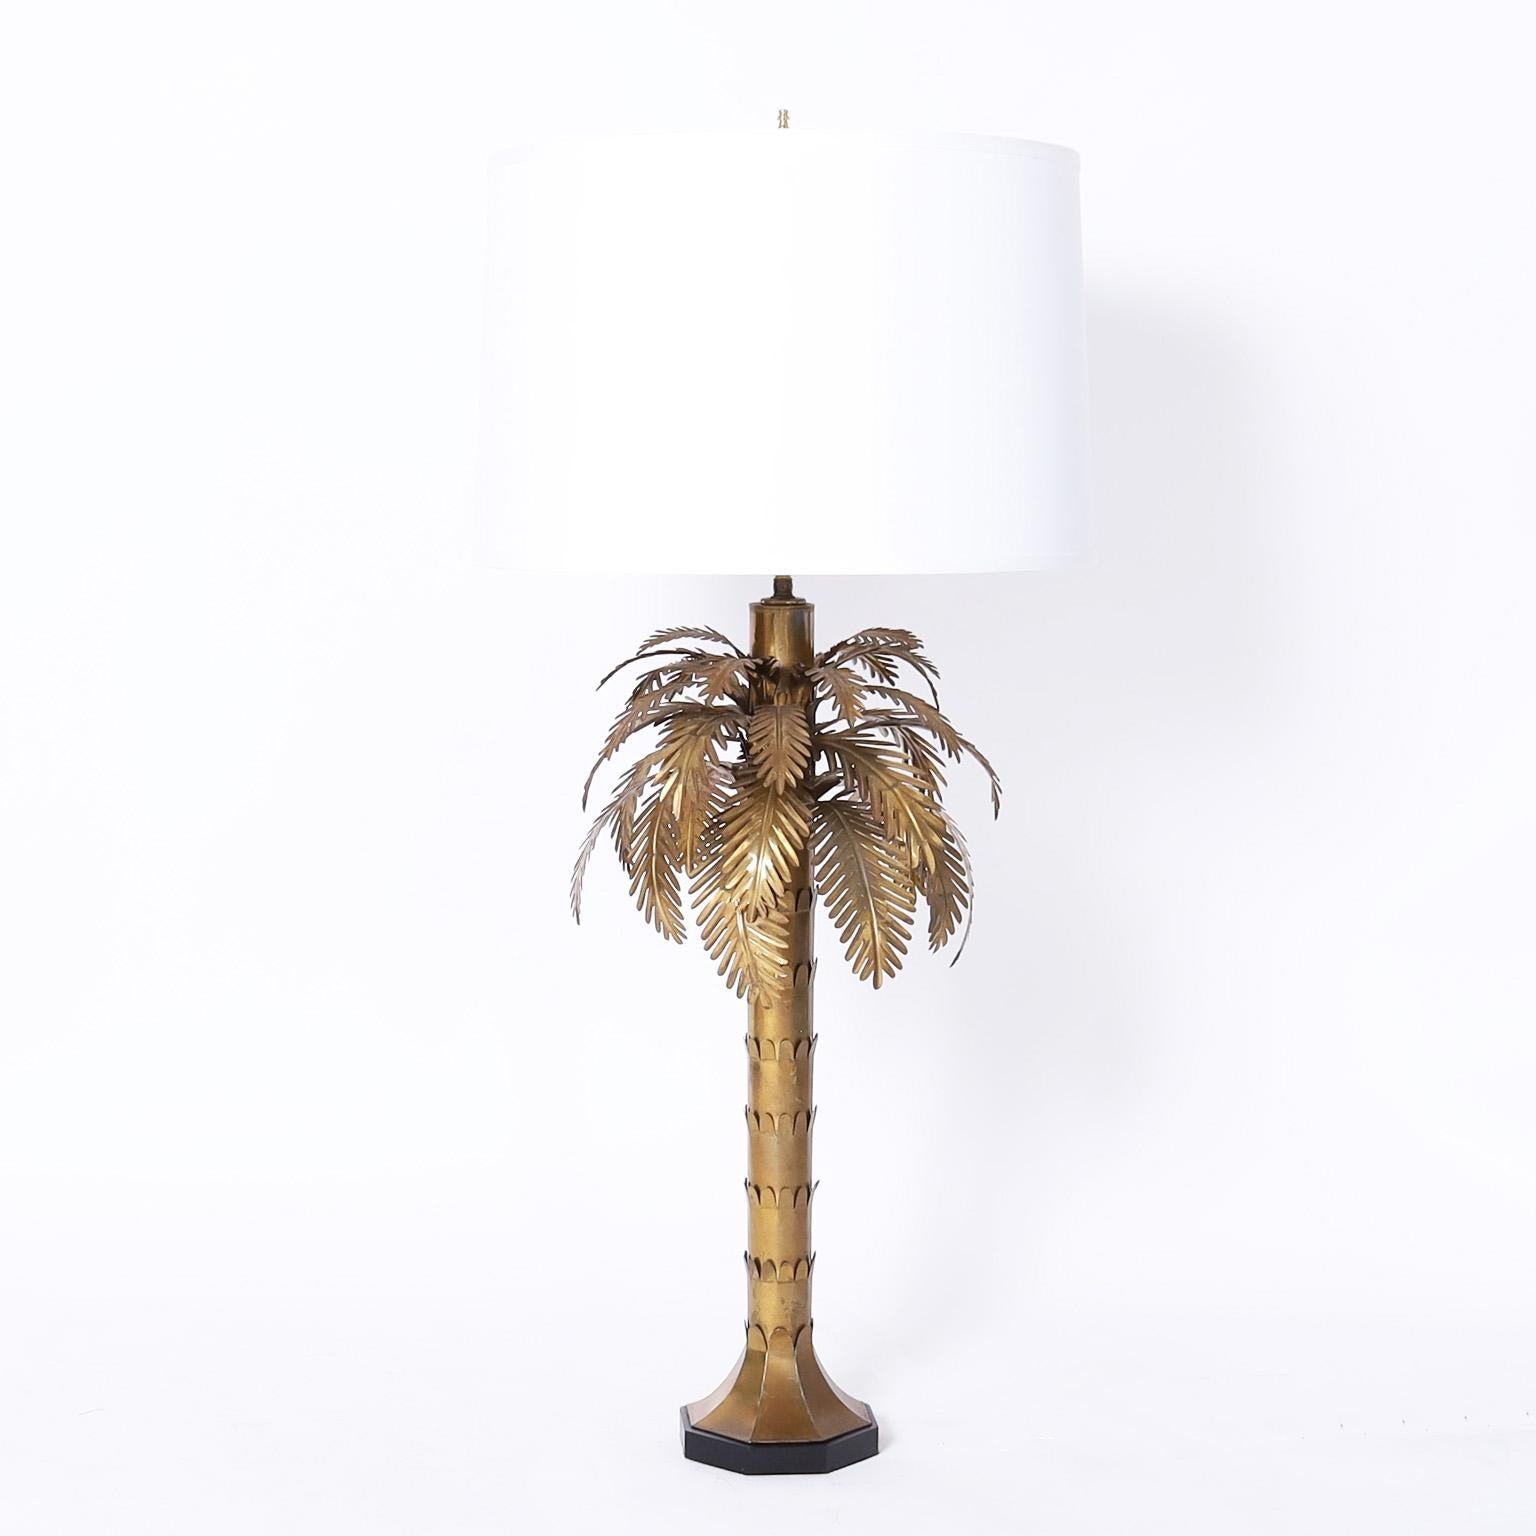 Chic mid century modern pair of table lamps crafted in brass in a stylized palm tree form on an octagon ebonized wood base. Best of the genre. 